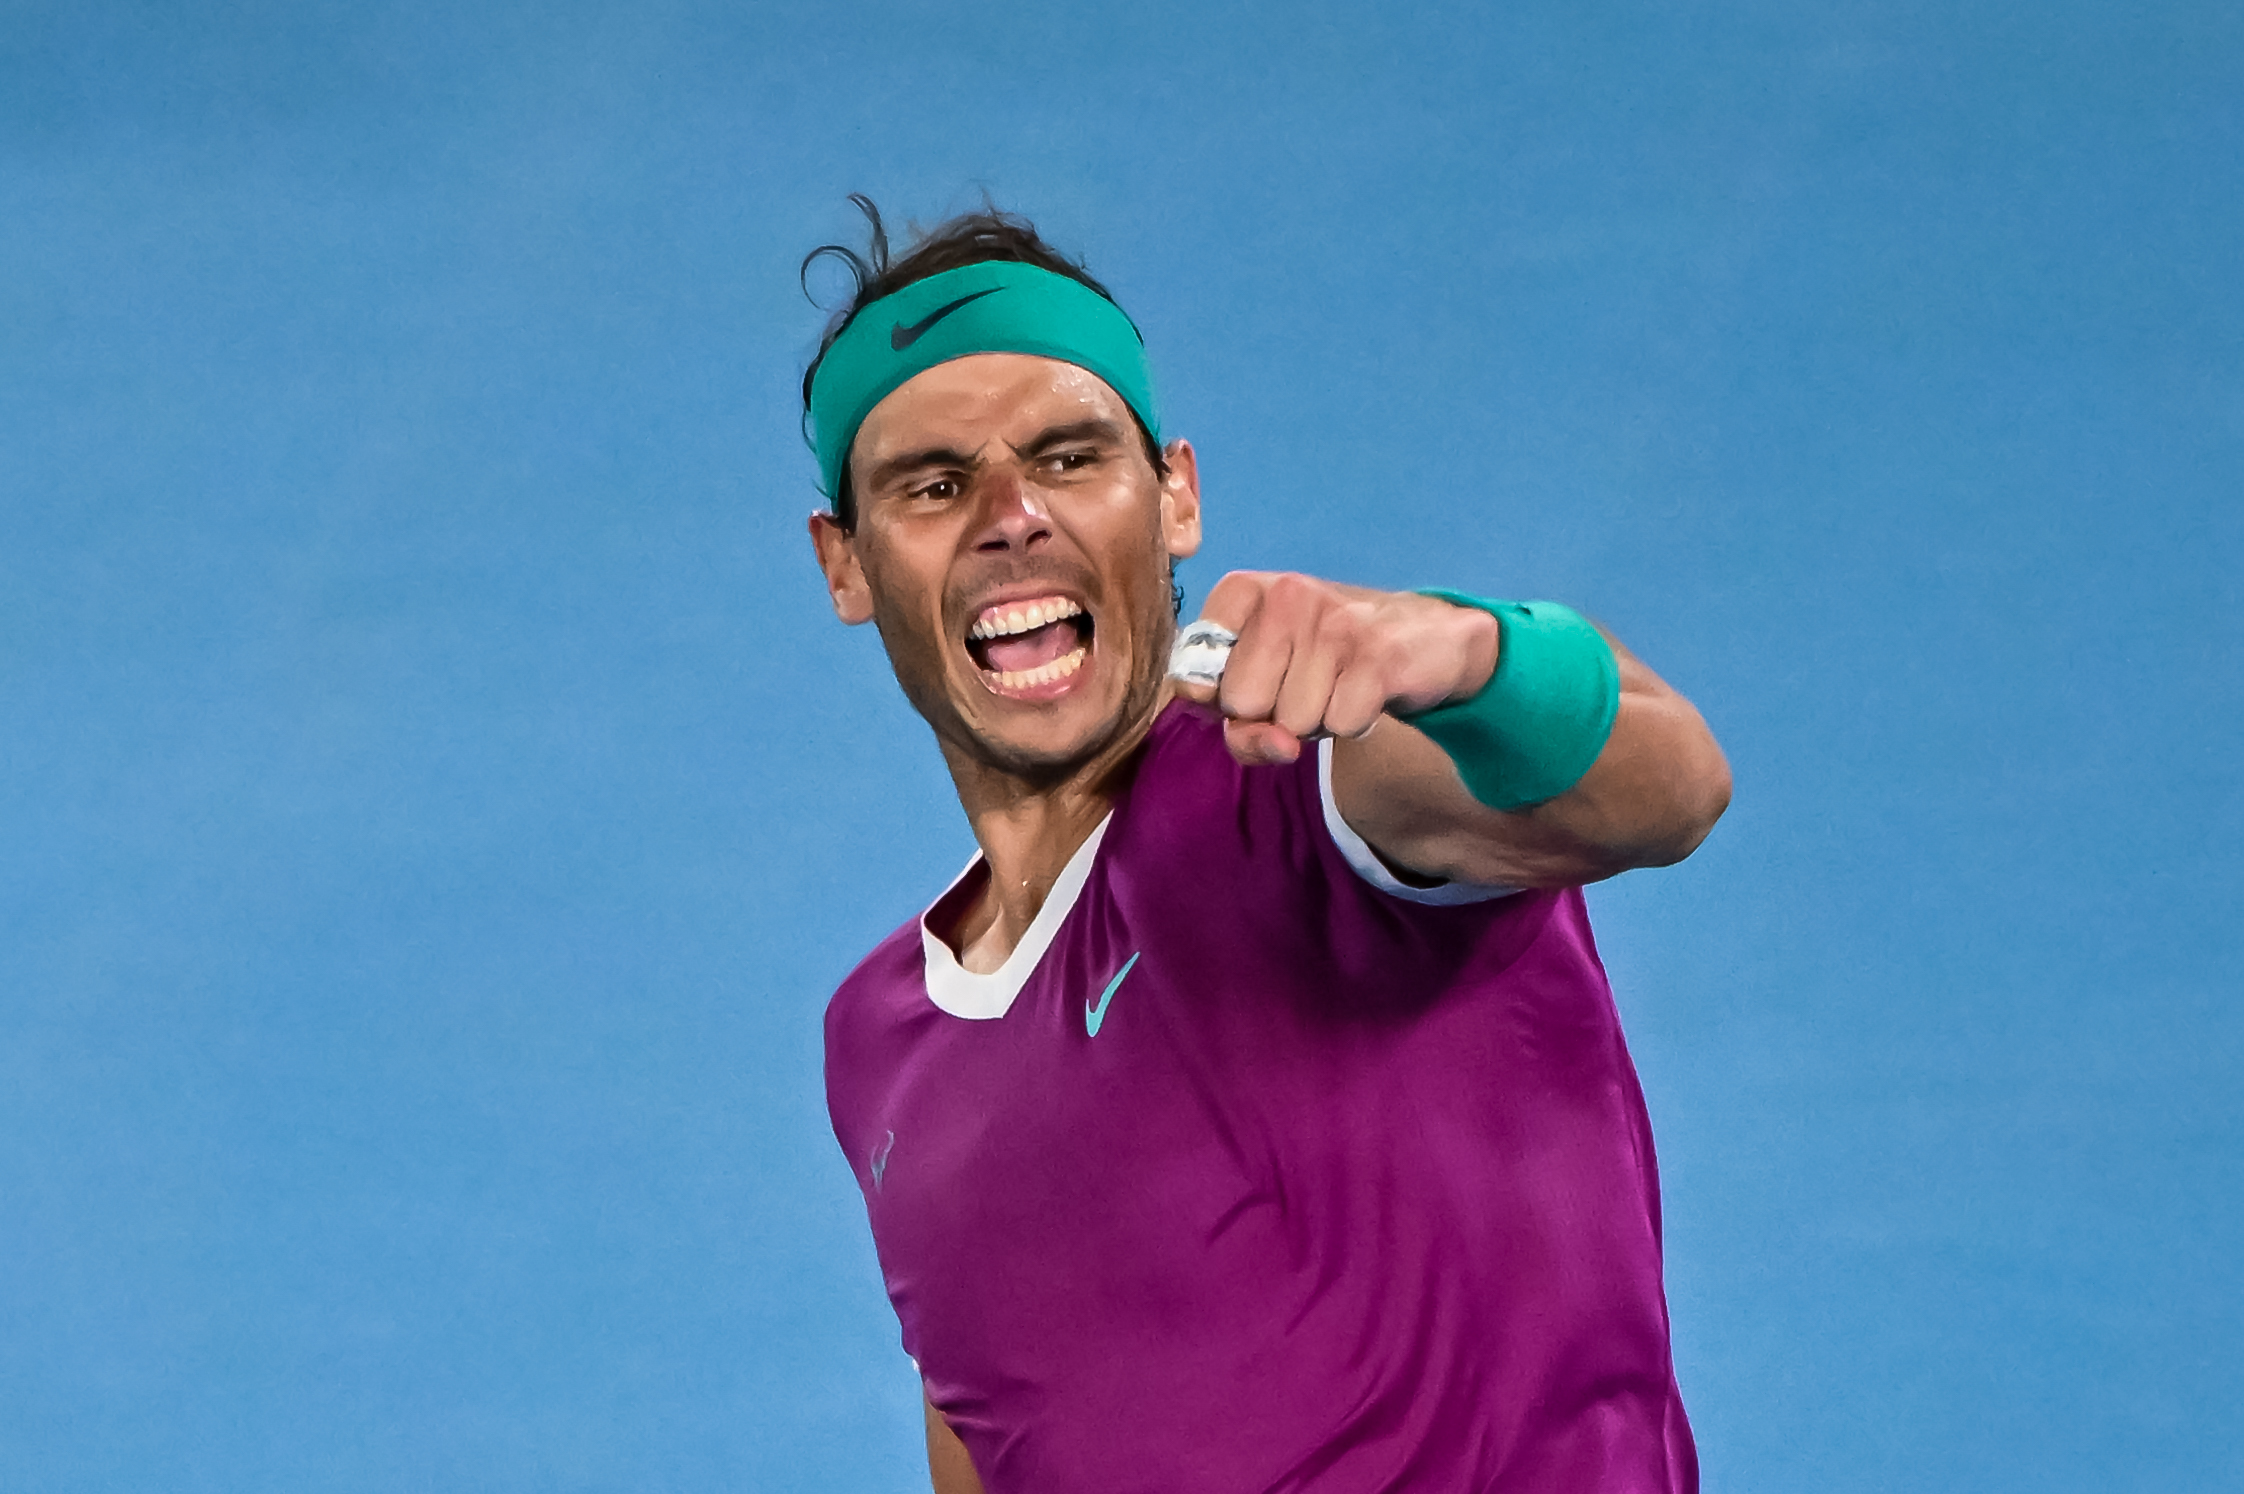 Nadal 'looks ready' for record 21st Grand Slam